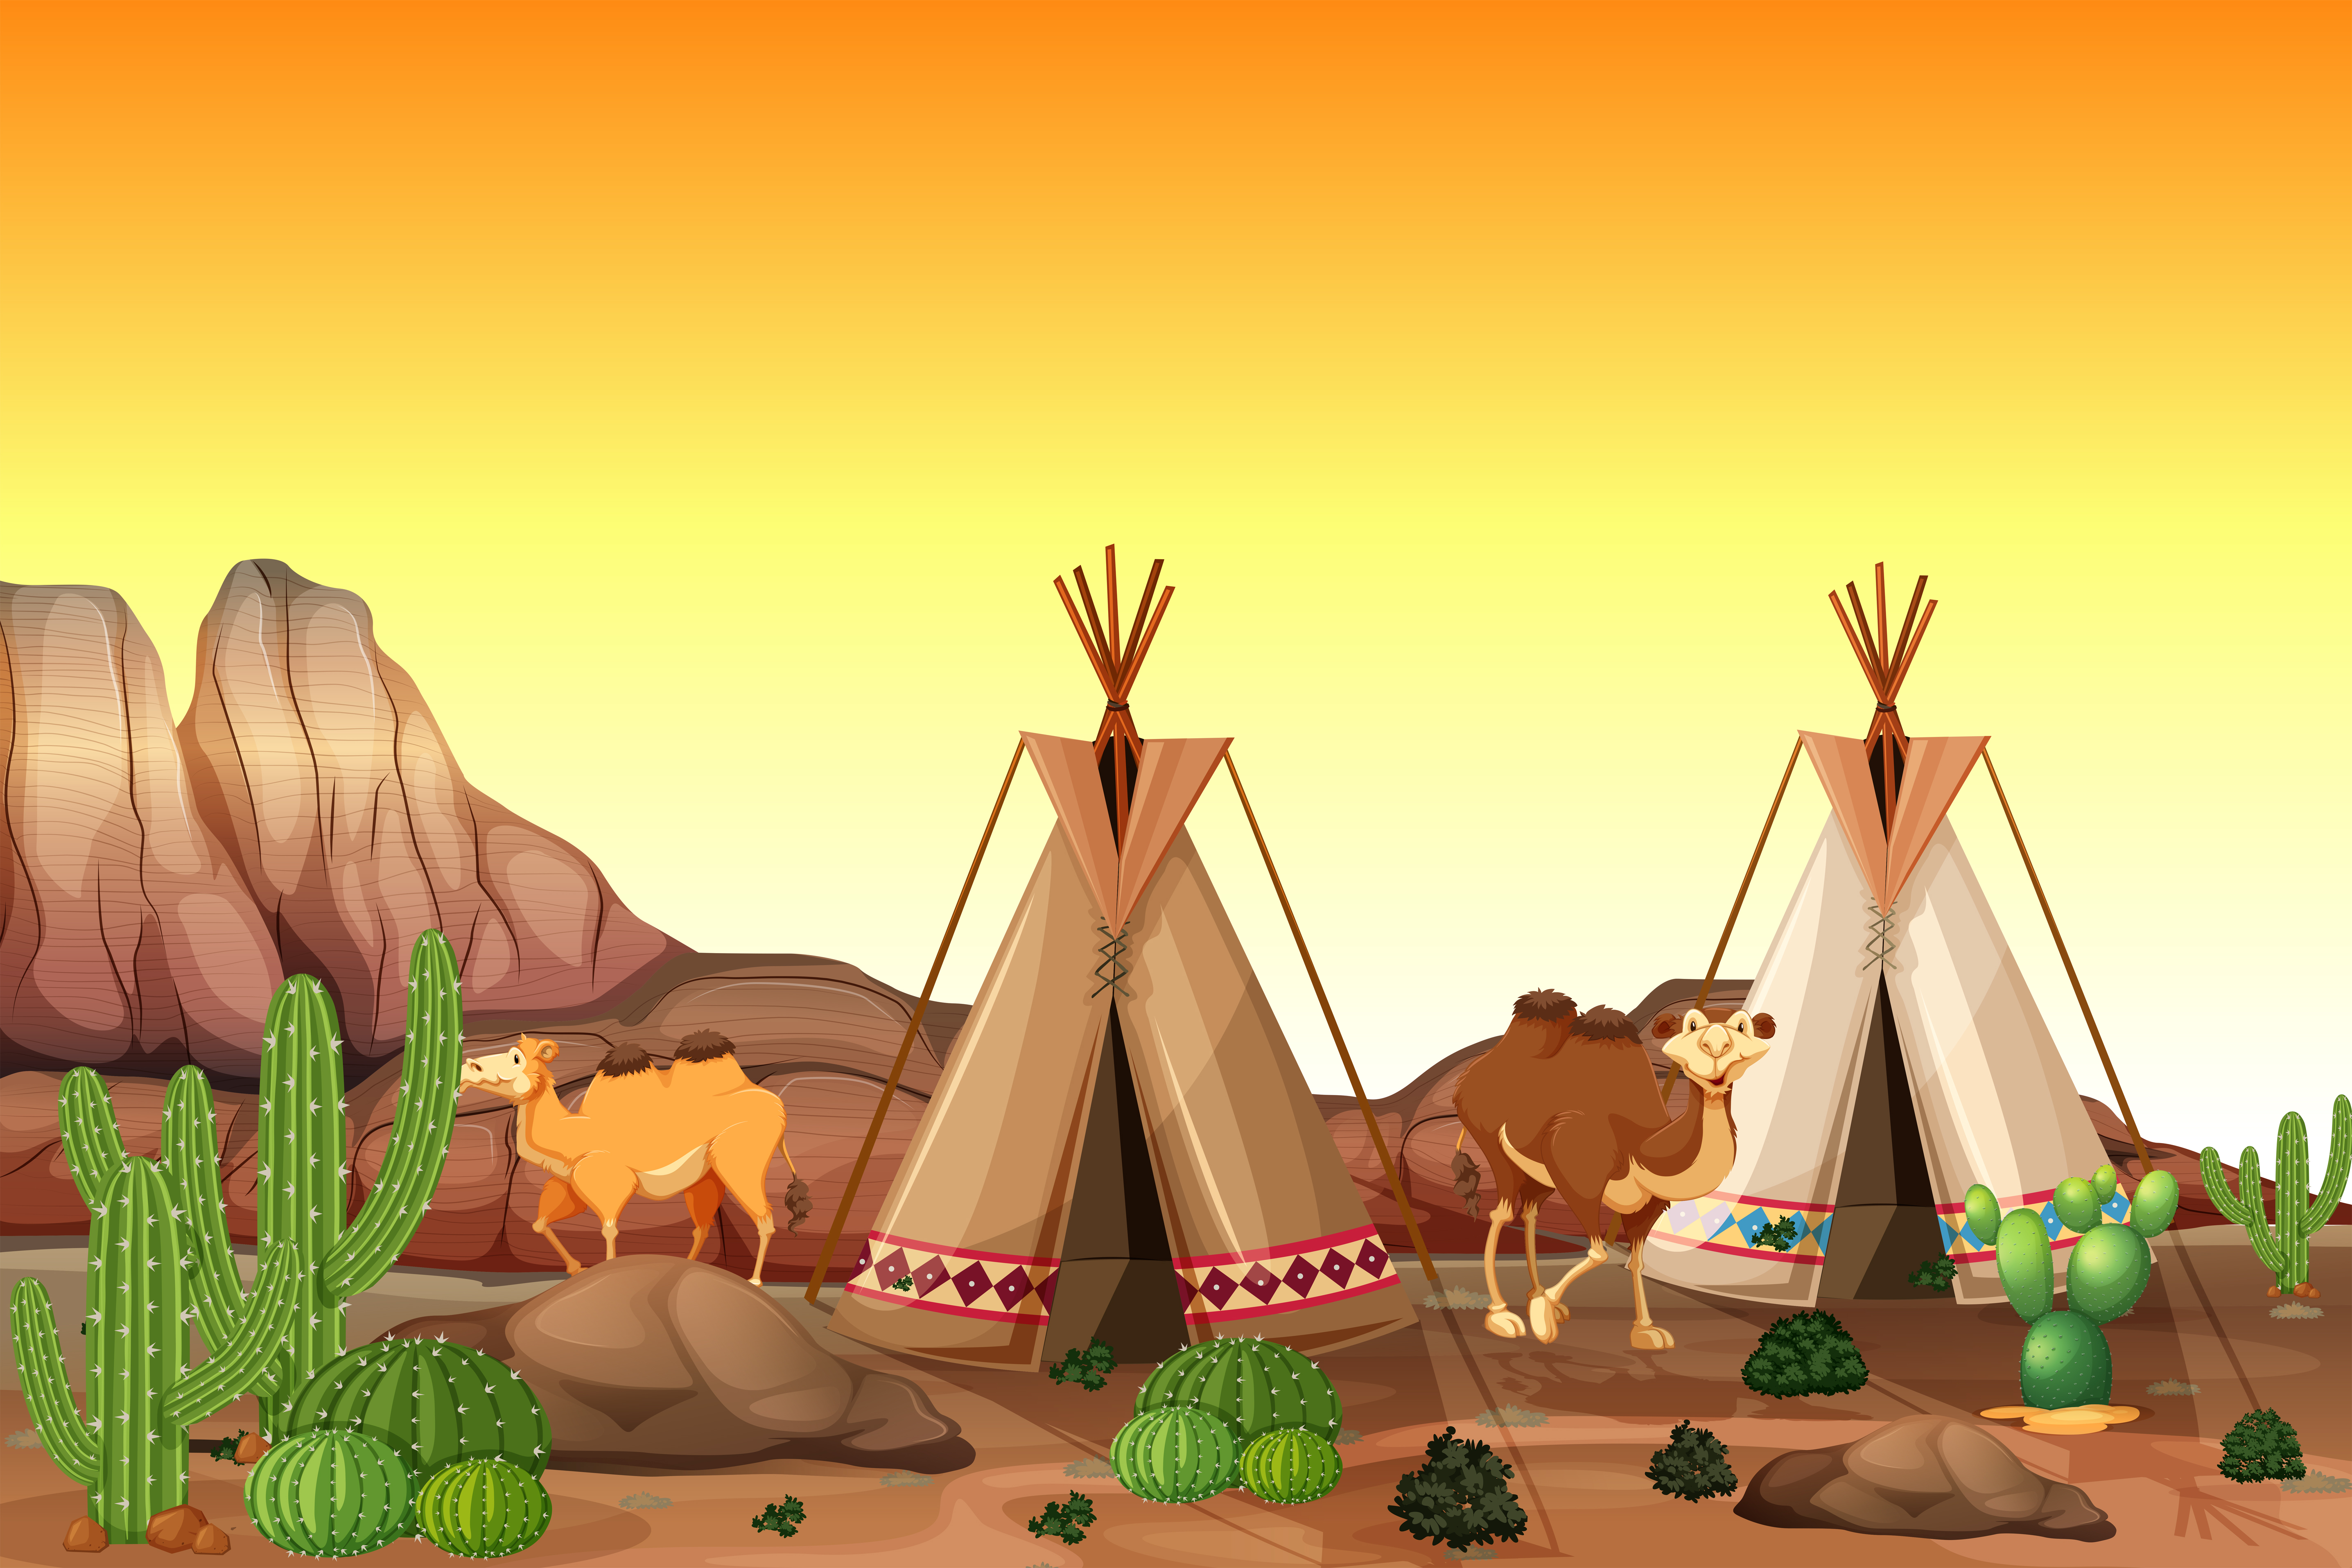 Download Desert scene with tents and camels - Download Free Vectors, Clipart Graphics & Vector Art